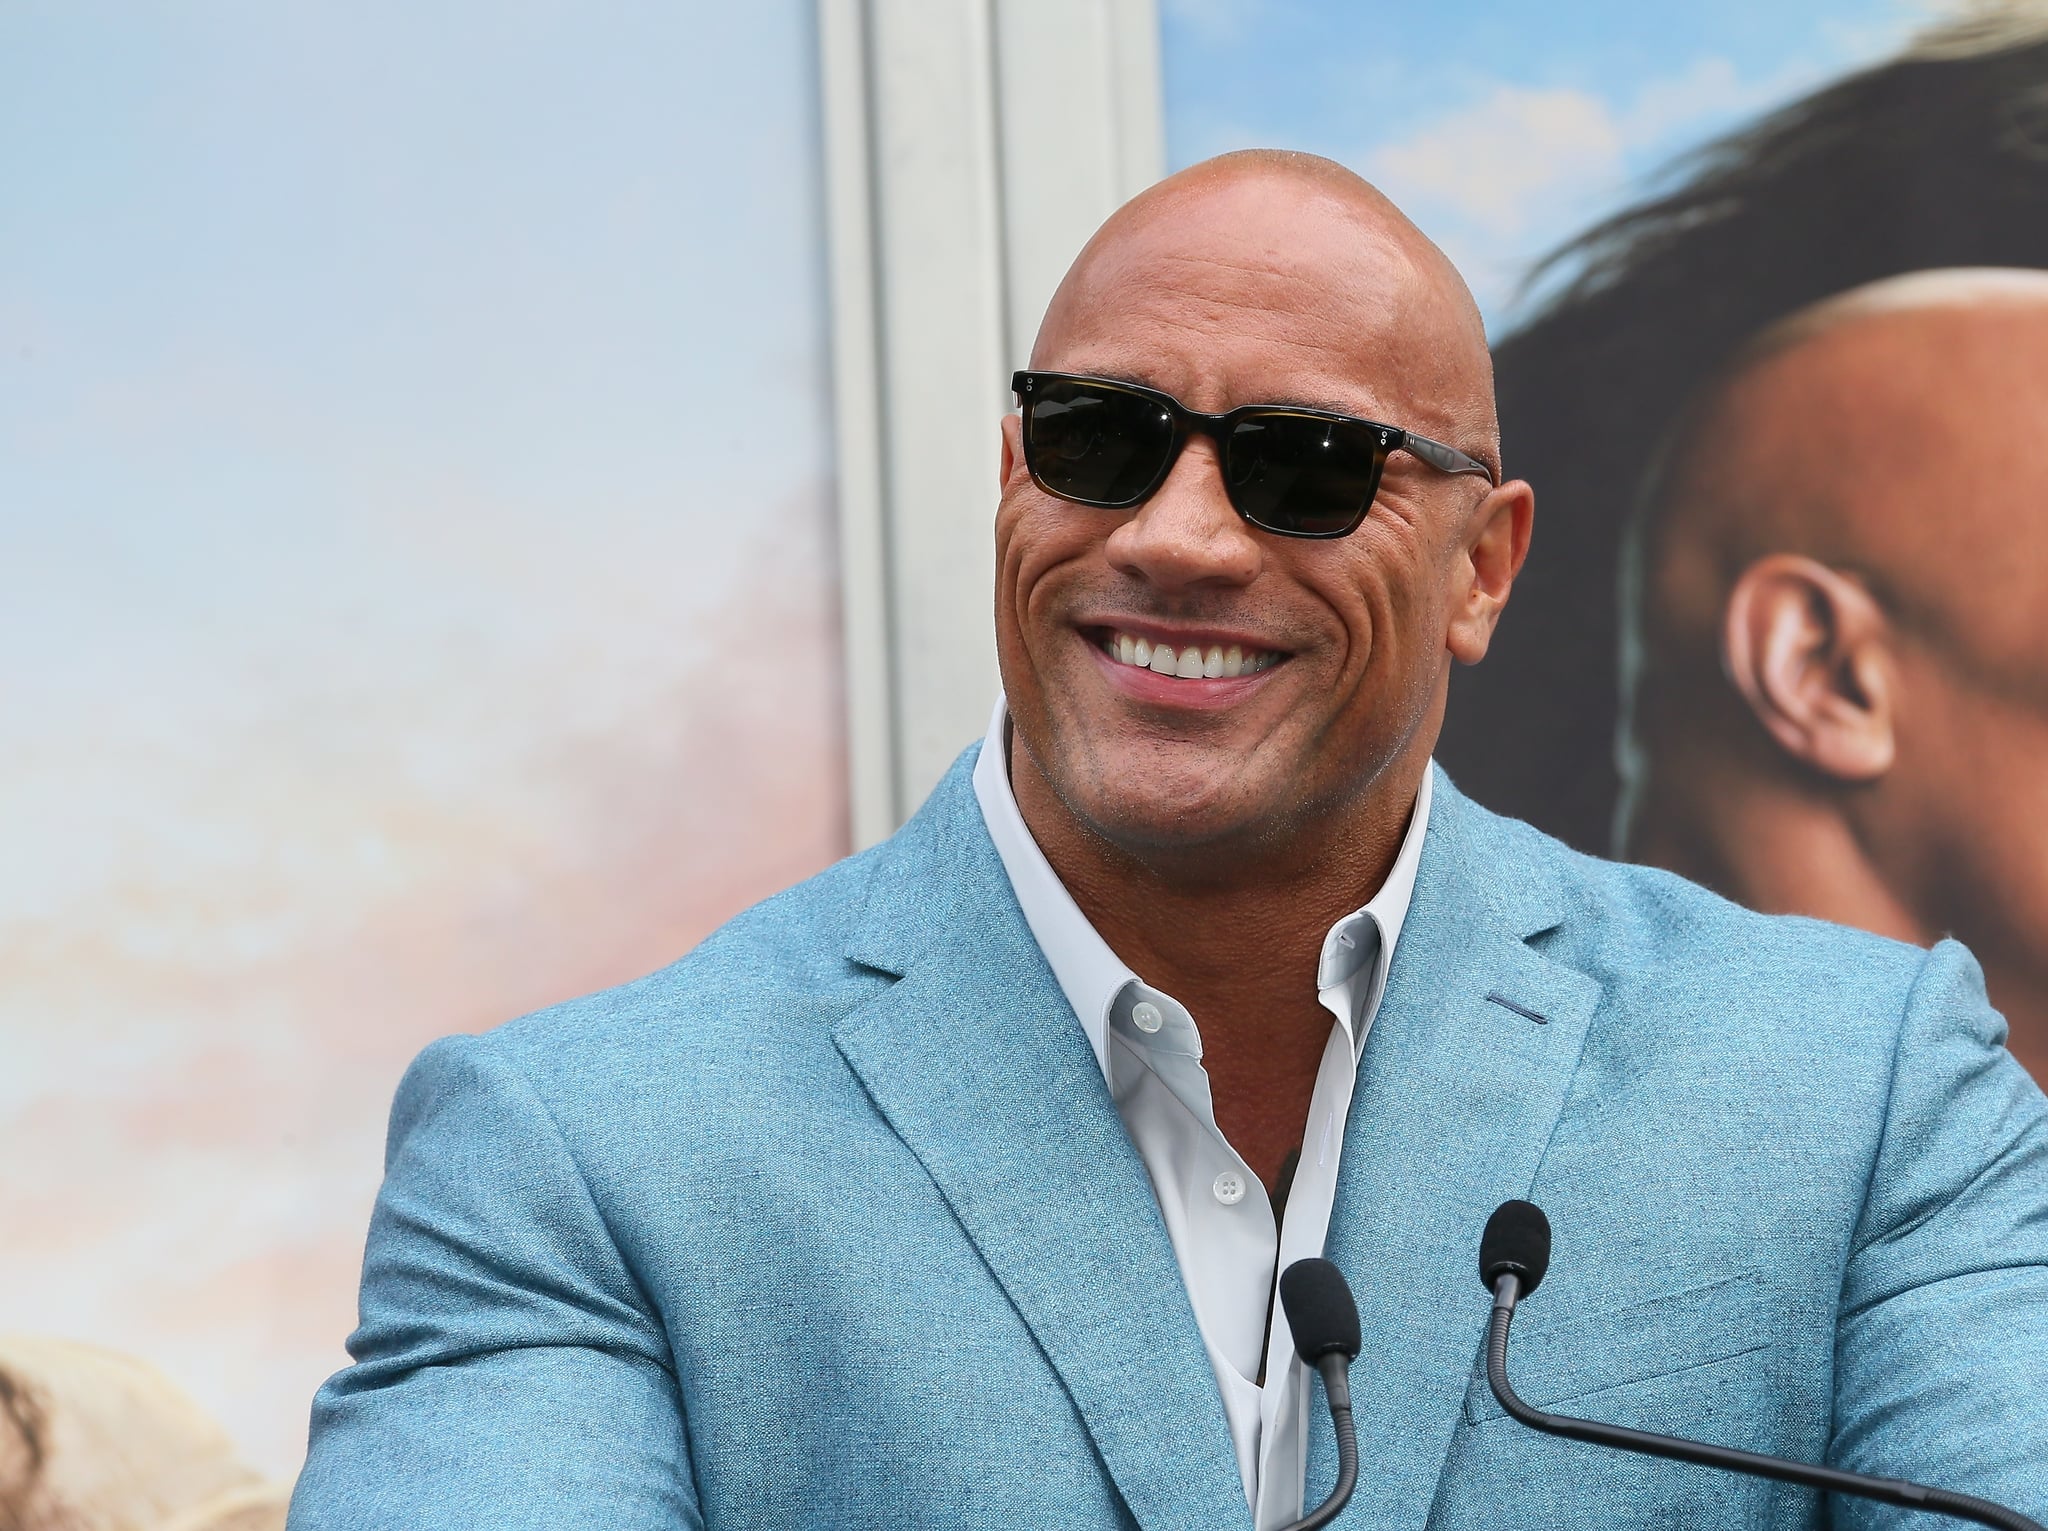 HOLLYWOOD, CALIFORNIA - DECEMBER 10: Dwayne Johnson attends a Hand and Footprint ceremony honouring Kevin Hart at the TCL Chinese Theatre IMAX on December 10, 2019 in Hollywood, California. (Photo by Jean Baptiste Lacroix/Getty Images)